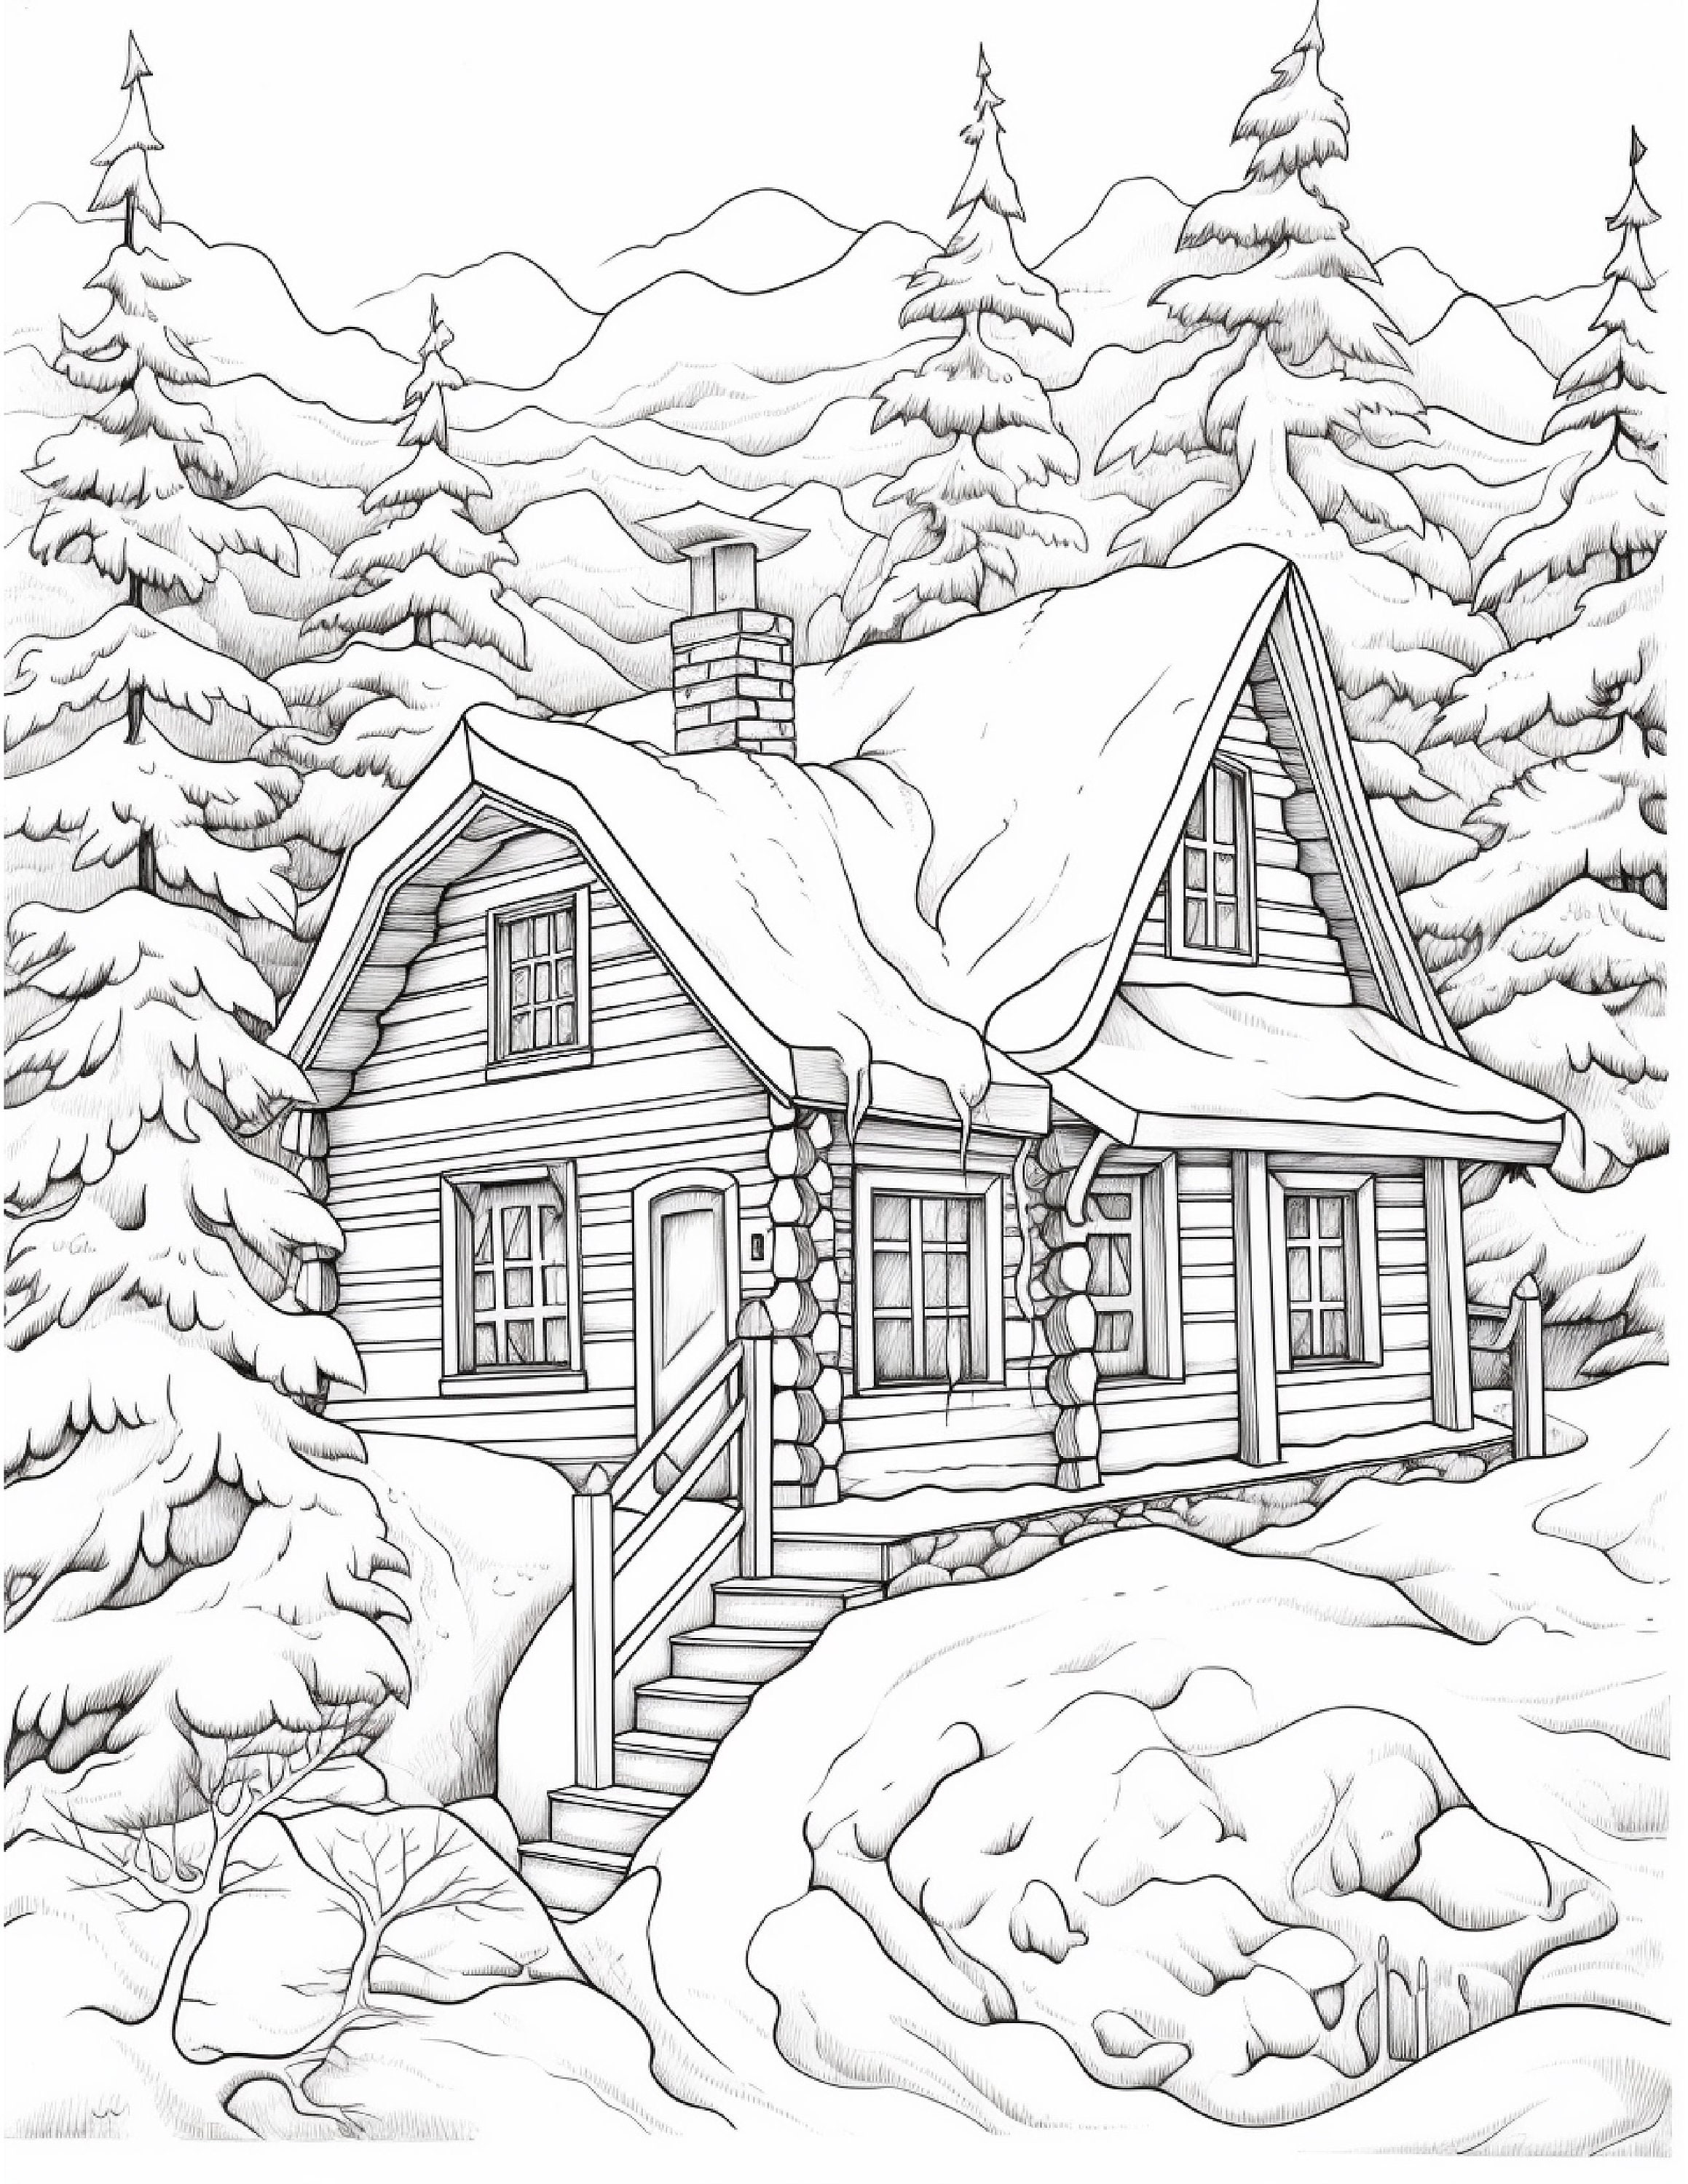 100 Country Winter Coloring Pages Adults Graphic by C - F - D